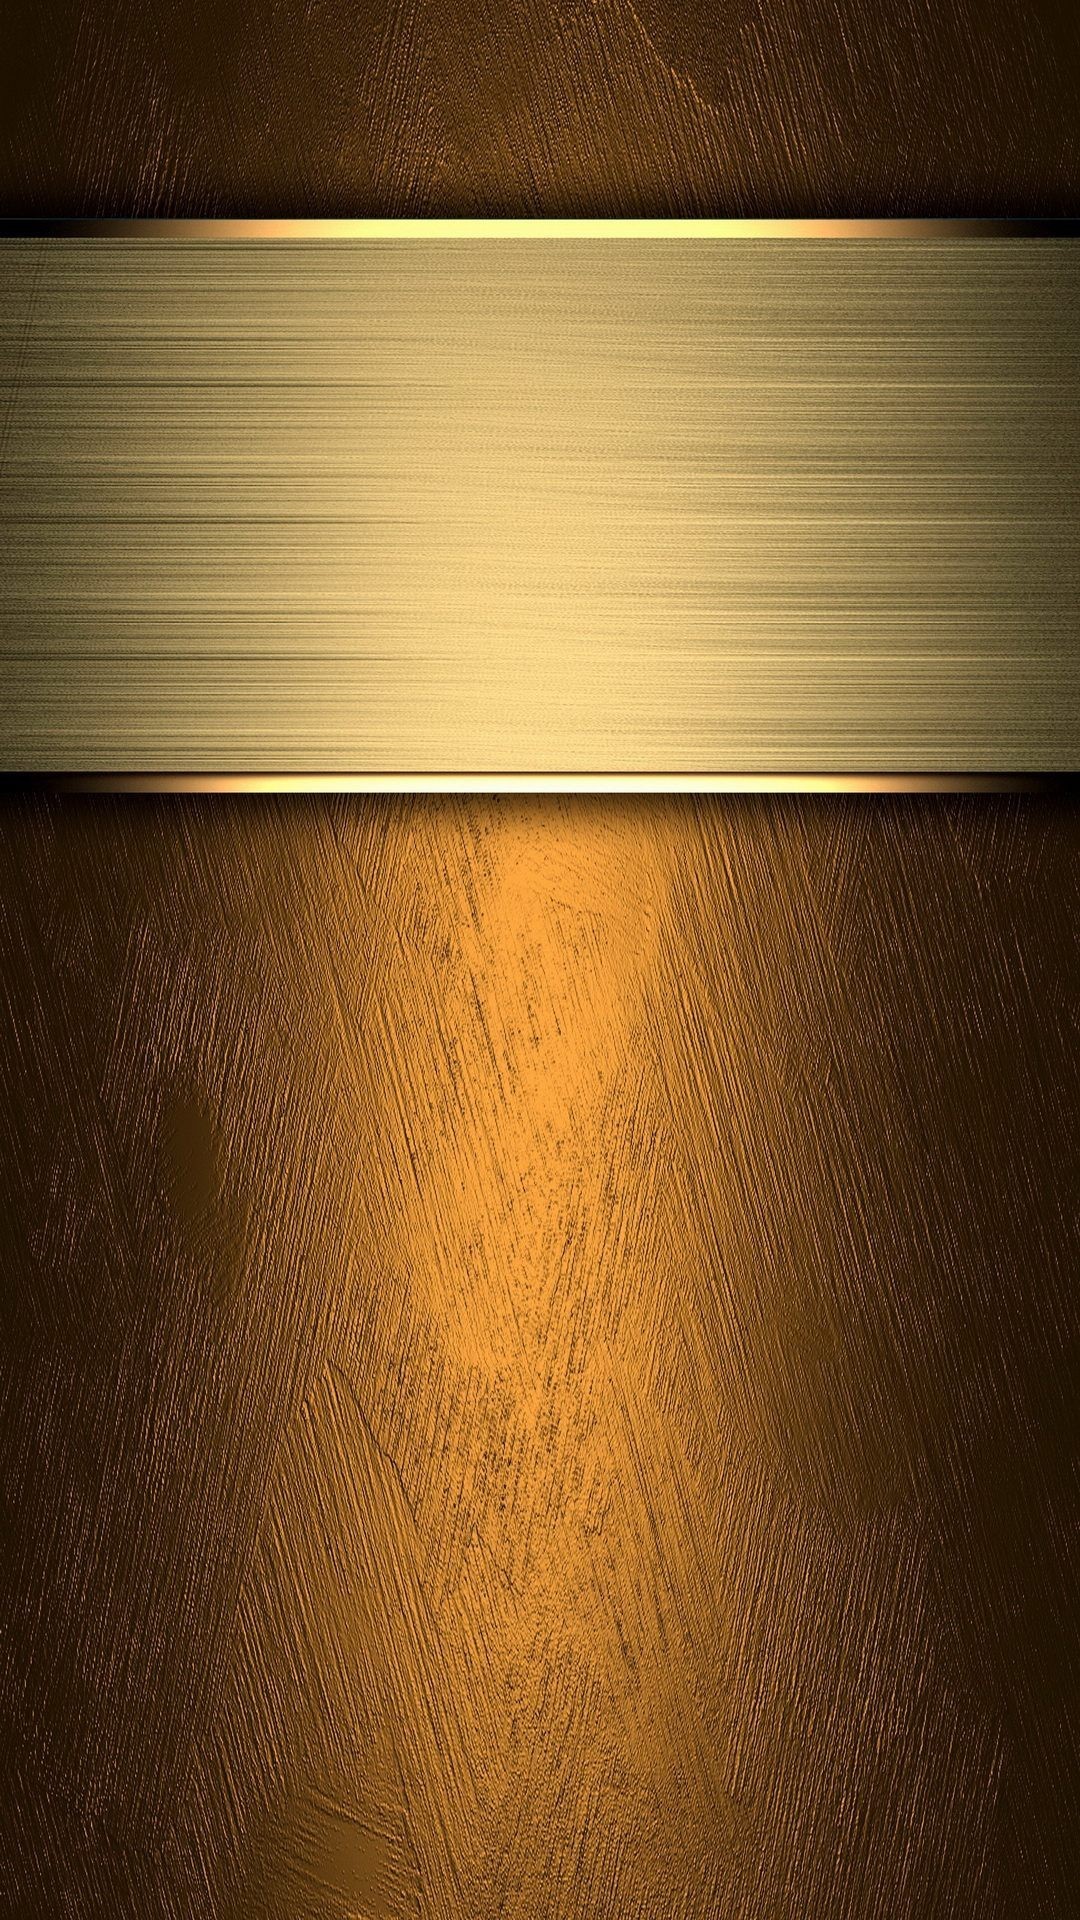 Elegant Gold Iphone 6 Plus Wallpapers - Gold Wallpaper For Iphone 6 -  1080x1920 Wallpaper 